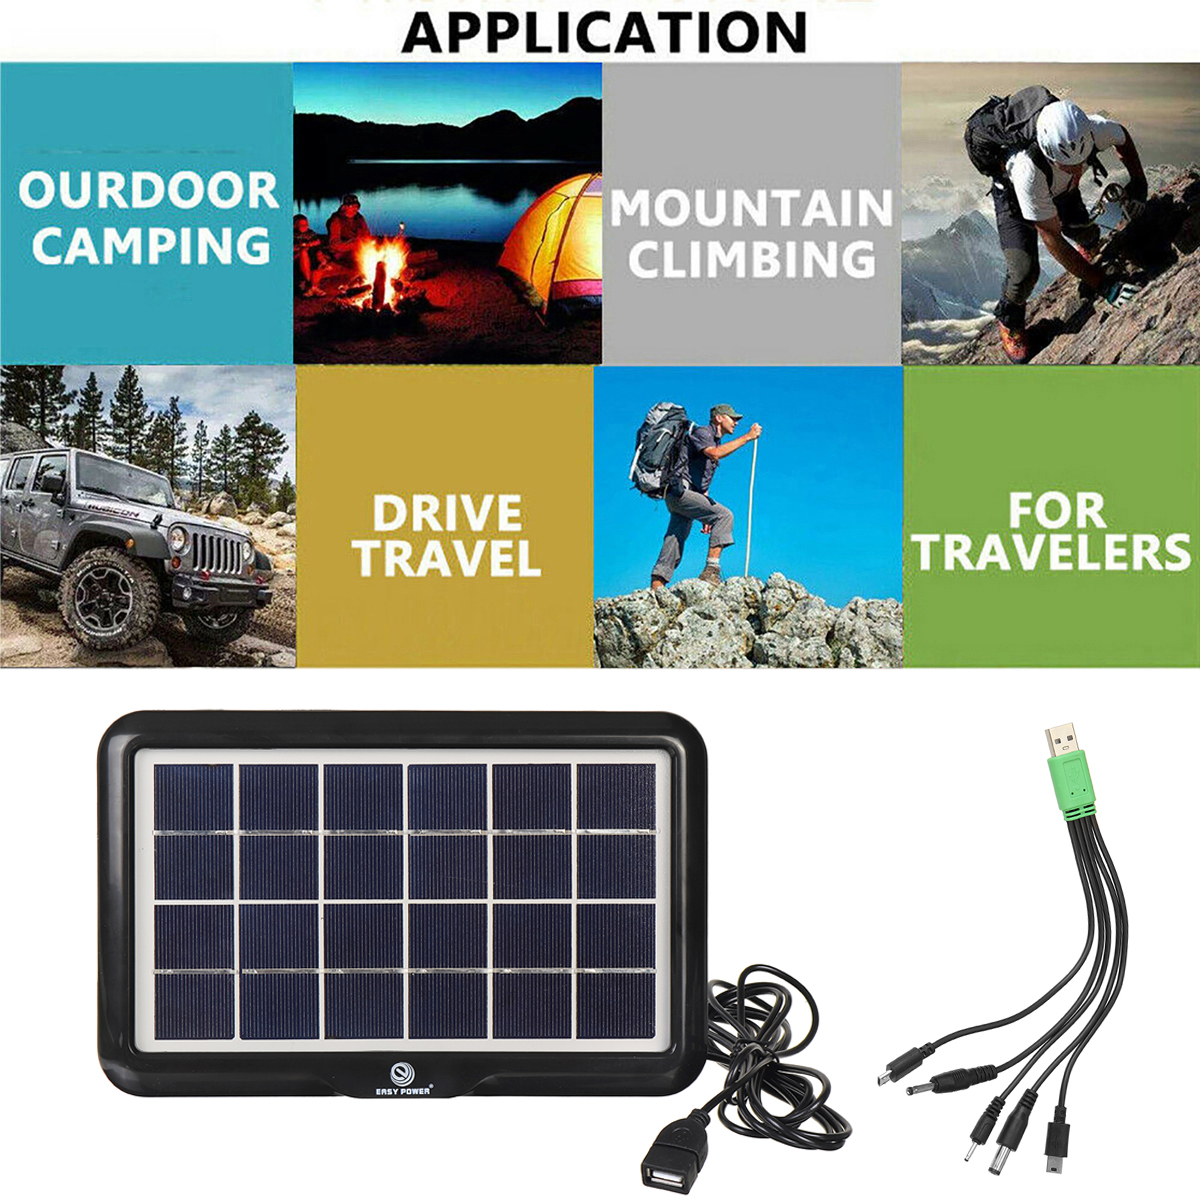 32W-Portable-Outdoor-Solar-Panel-Polycrystalline-Silicon-Solar-Panel-With-Interface-Mobile-Phone-Fan-1928784-2